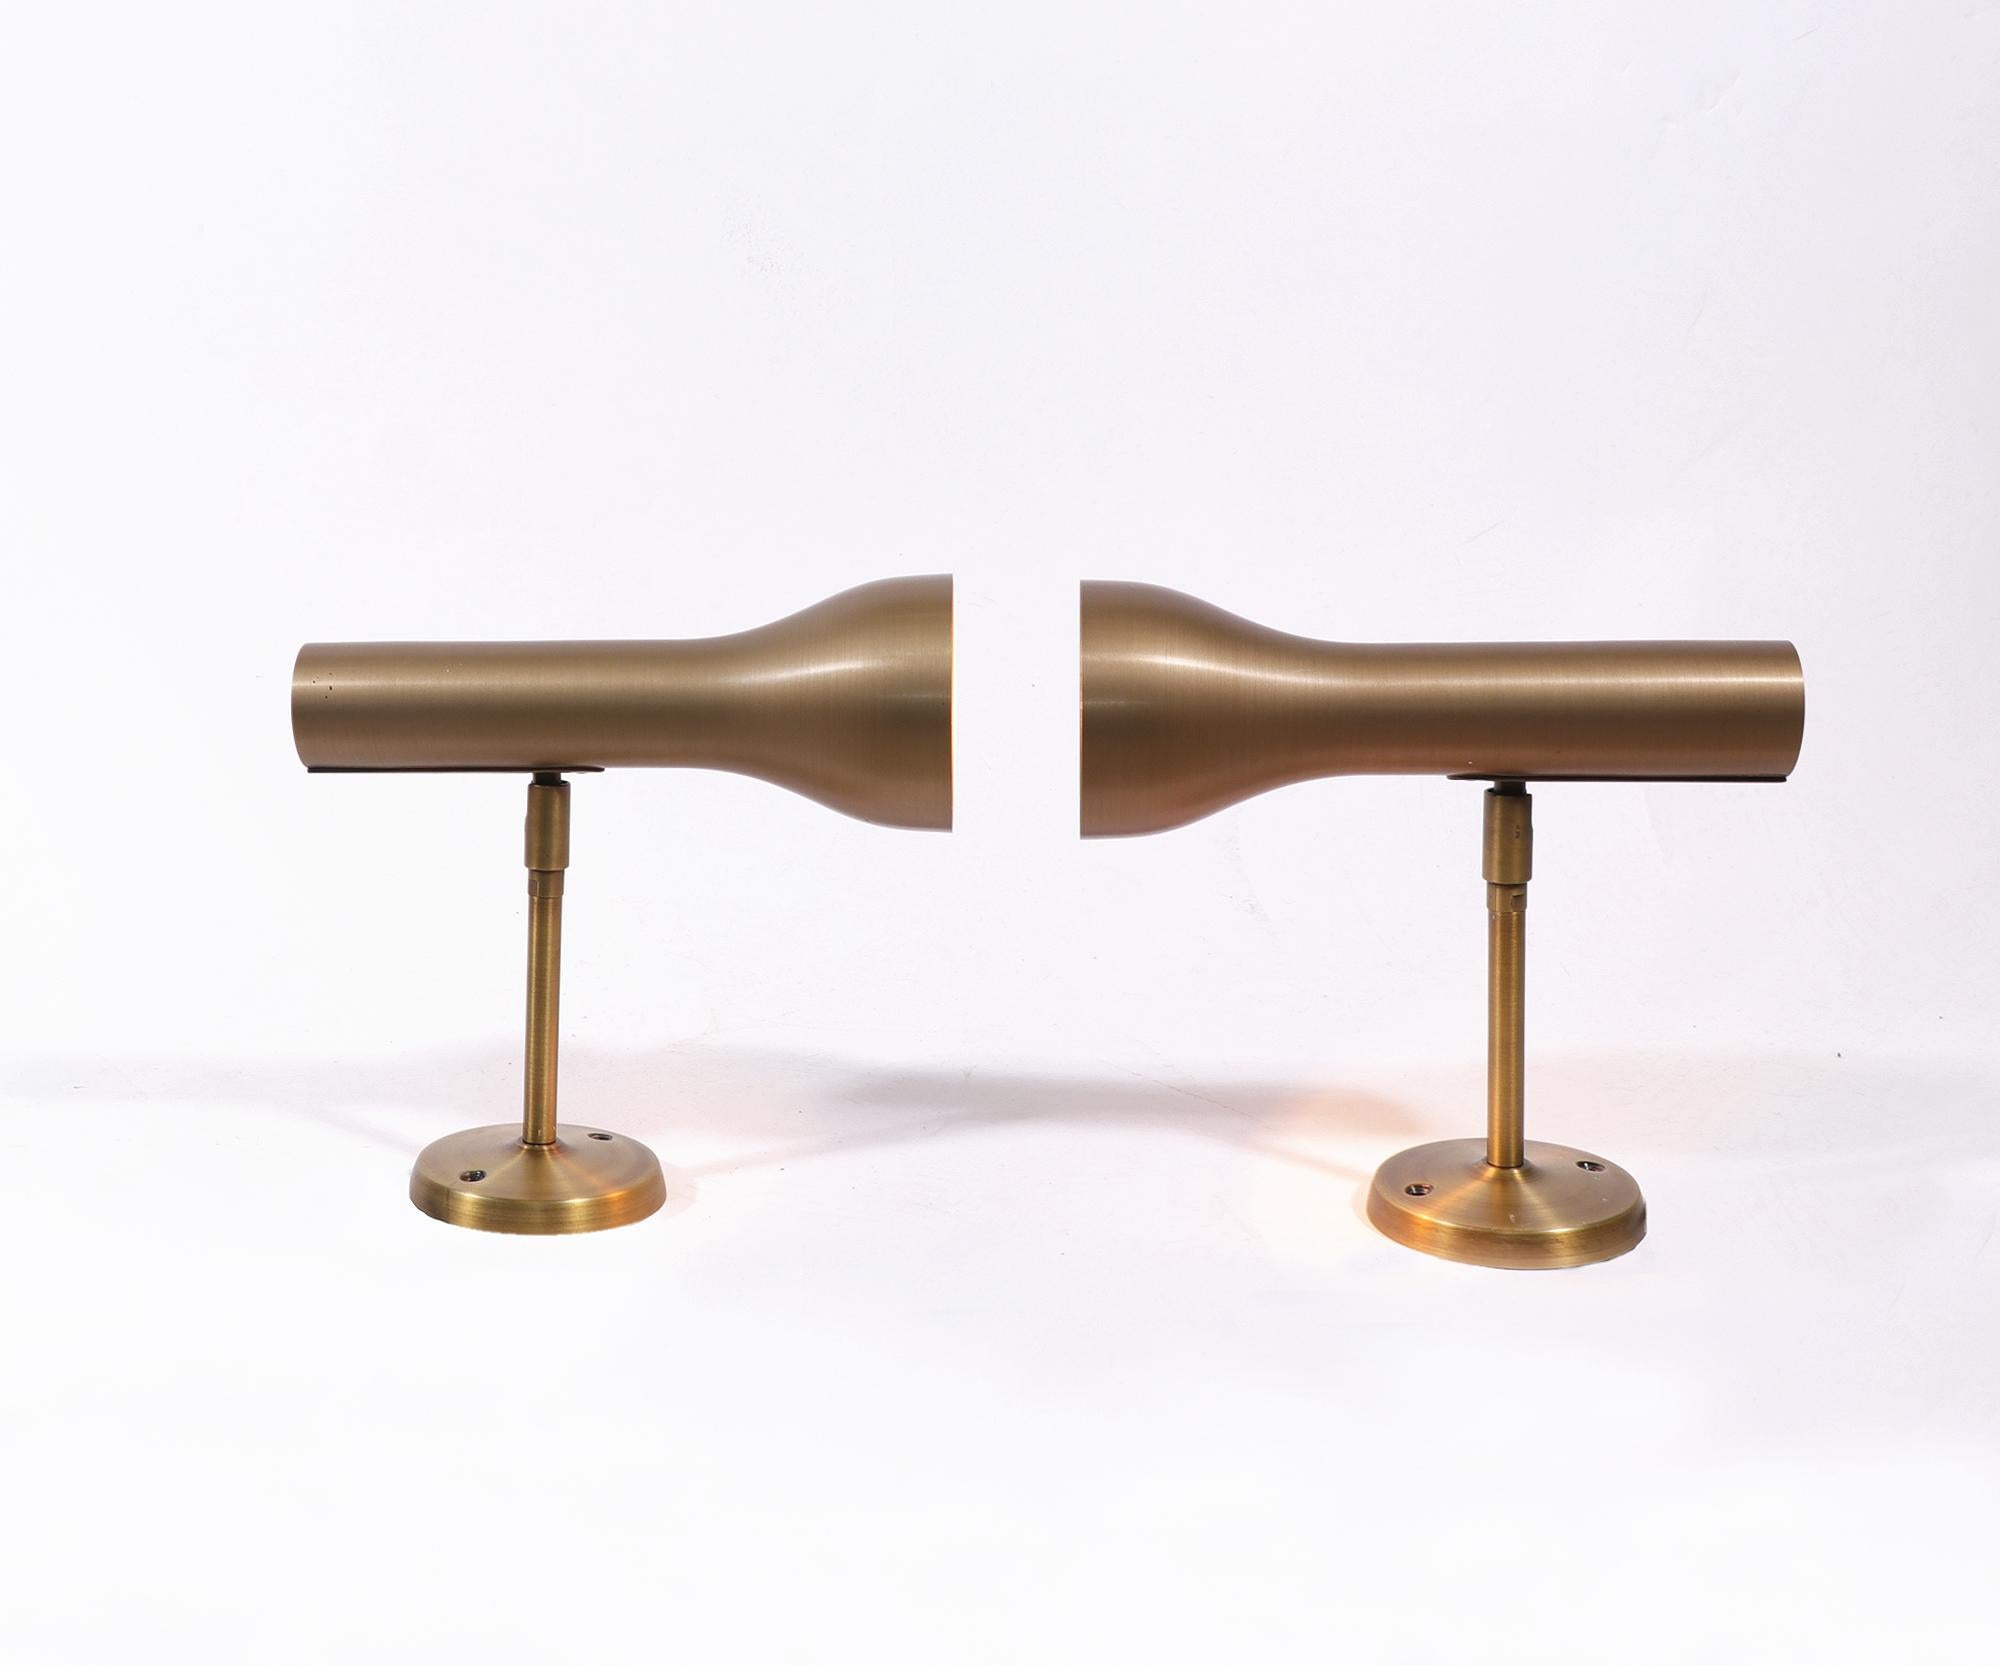 Pair of brass wall spots designed by Lad Team for Swiss Lamps International, Zürich in the 1960s.

Lighting: Each lamp takes one large Edison bulb. 
Measures: 9 in. / 23 cm x 9 in. / 23 cm x 3.5 in. / 9 cm (angled). 
Condition: The lamps are in very